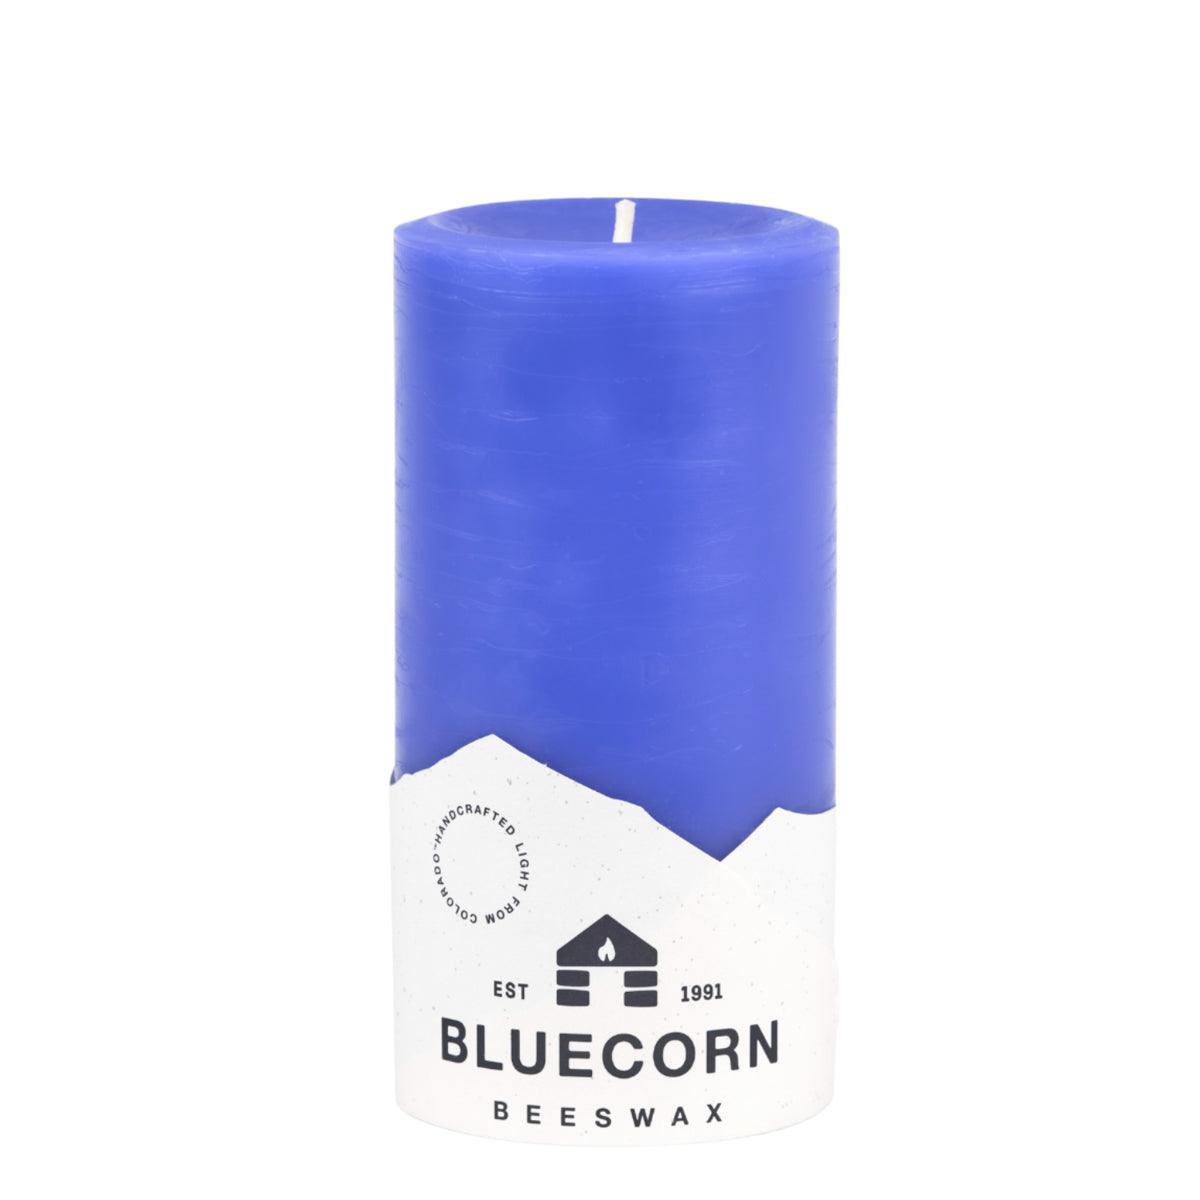 Bluecorn Beeswax 100% Pure Beeswax 3" x 6" Colored Pillar Candle. Burn Time: 90 hours. Made with 100% Pure Beeswax, wax is Periwinkle in color. Made with 100% pure cotton wick, no lead and paraffin free. Clean burning and non-toxic. Features Bluecorn Beeswax label printed on 100% recycled paper. Clearance items might have an odd blemish or air bubble, but will still burn beautifully. 